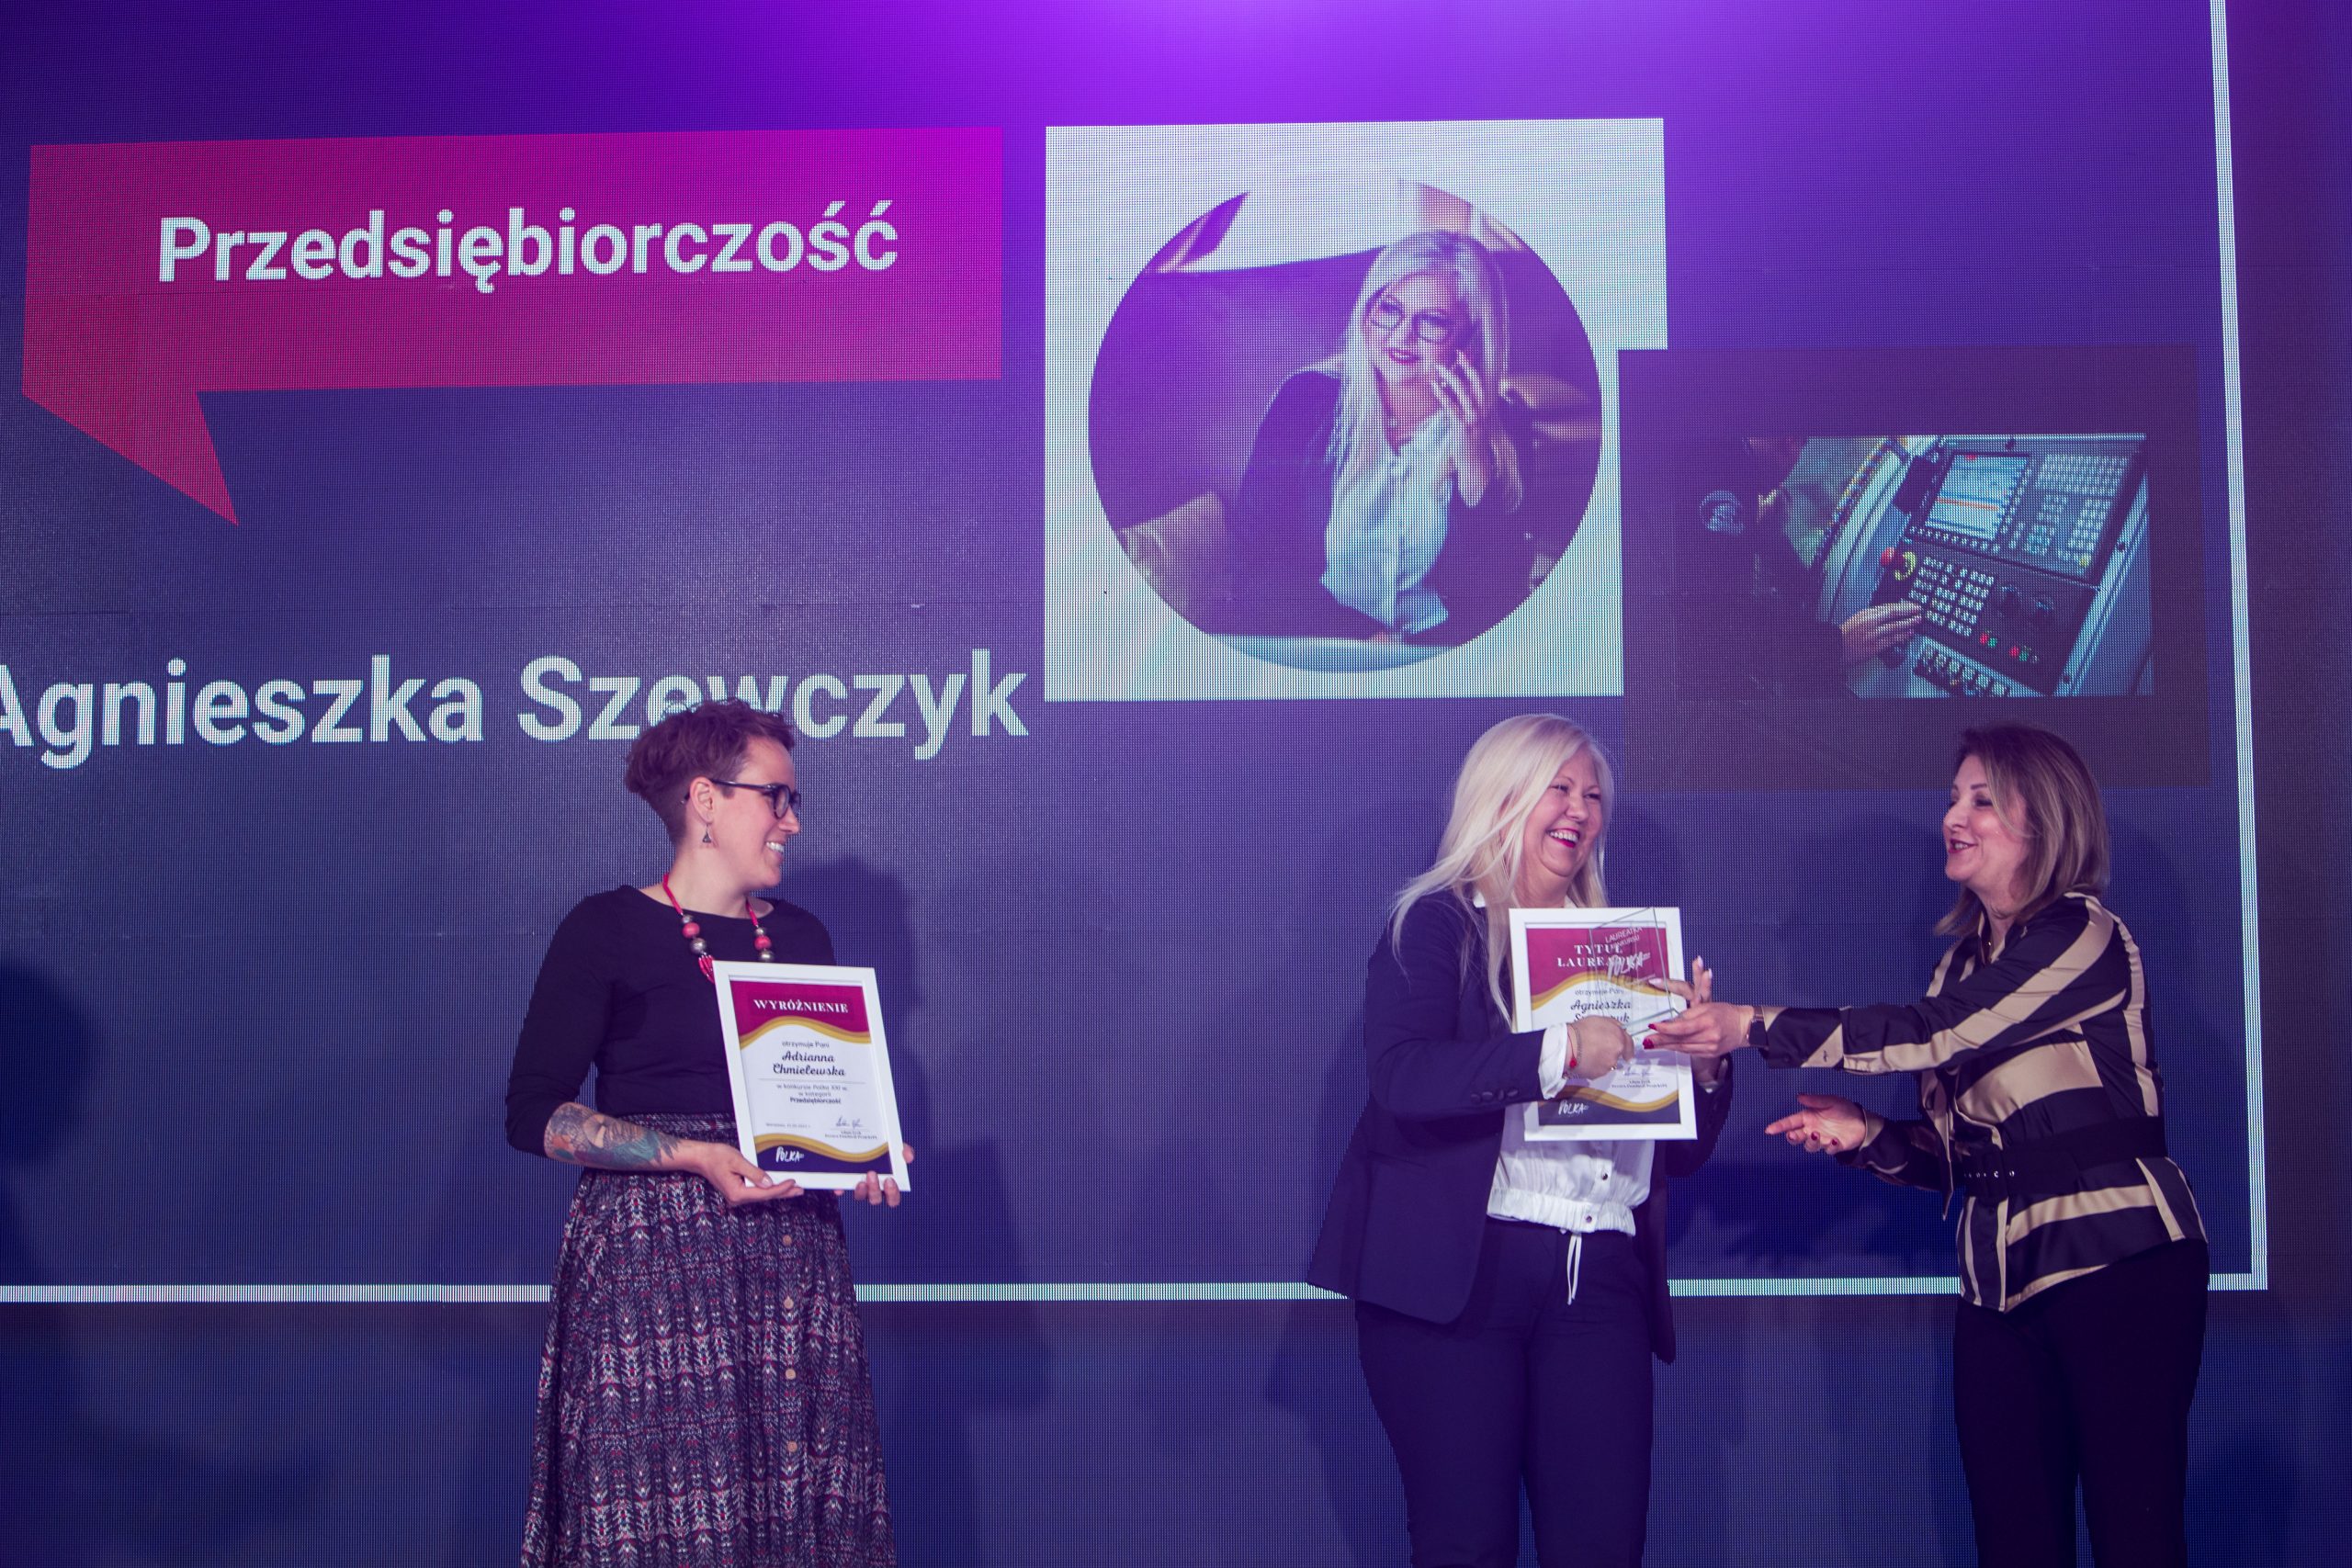 The Polish Woman - Conference